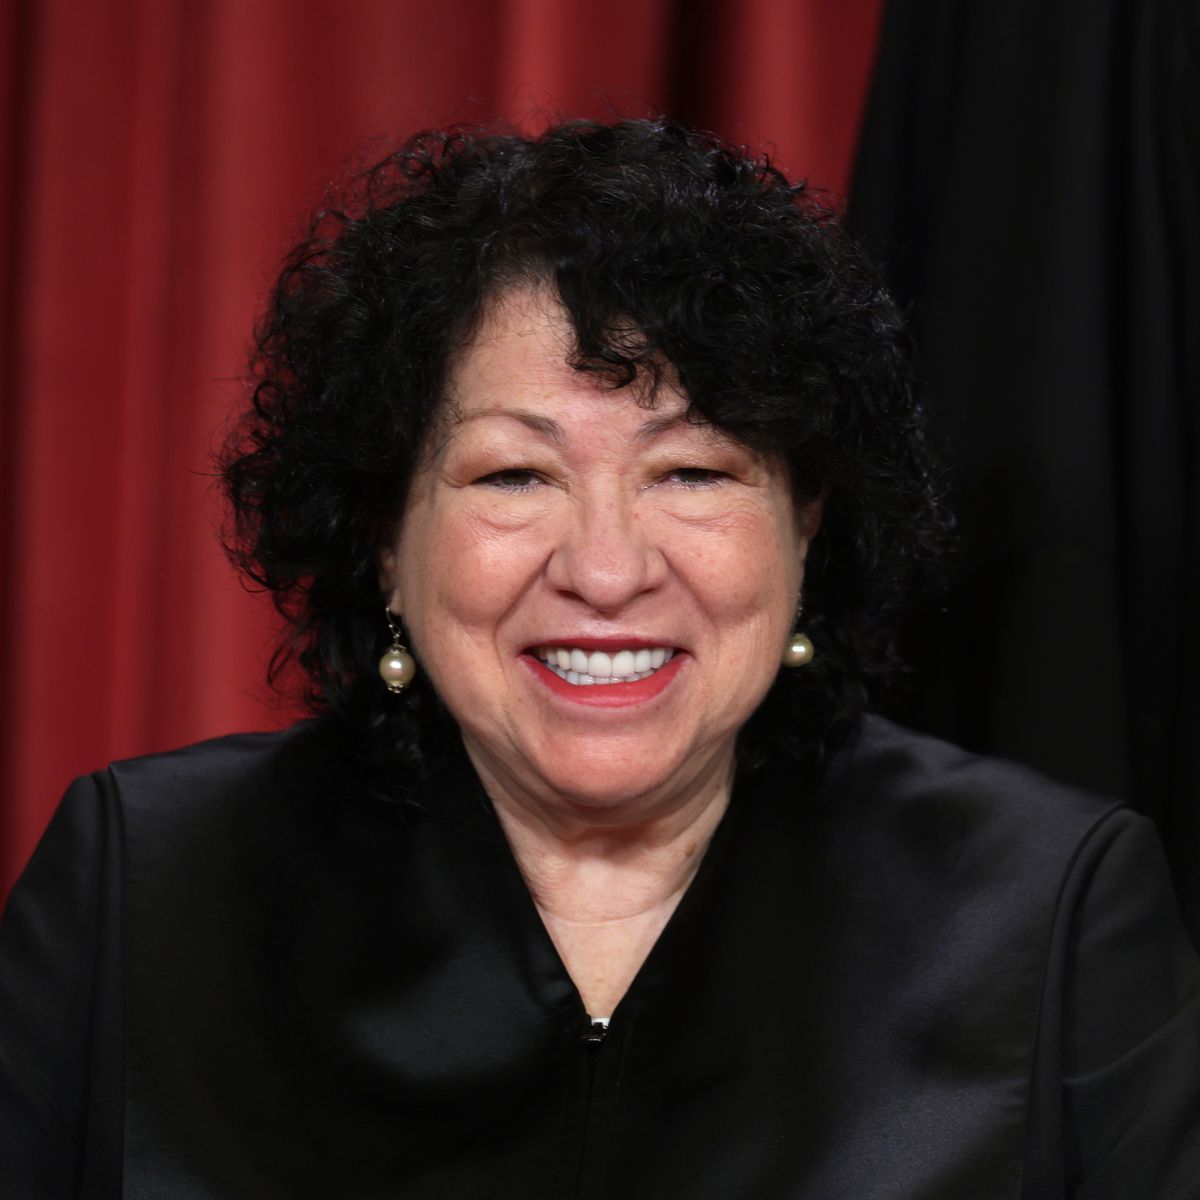 sonia sotomayor wears her black supreme court justice robes, dangling pearl earrings, and red lipstick, she smiles at the camera, and her curly hair frames her face down to her neck